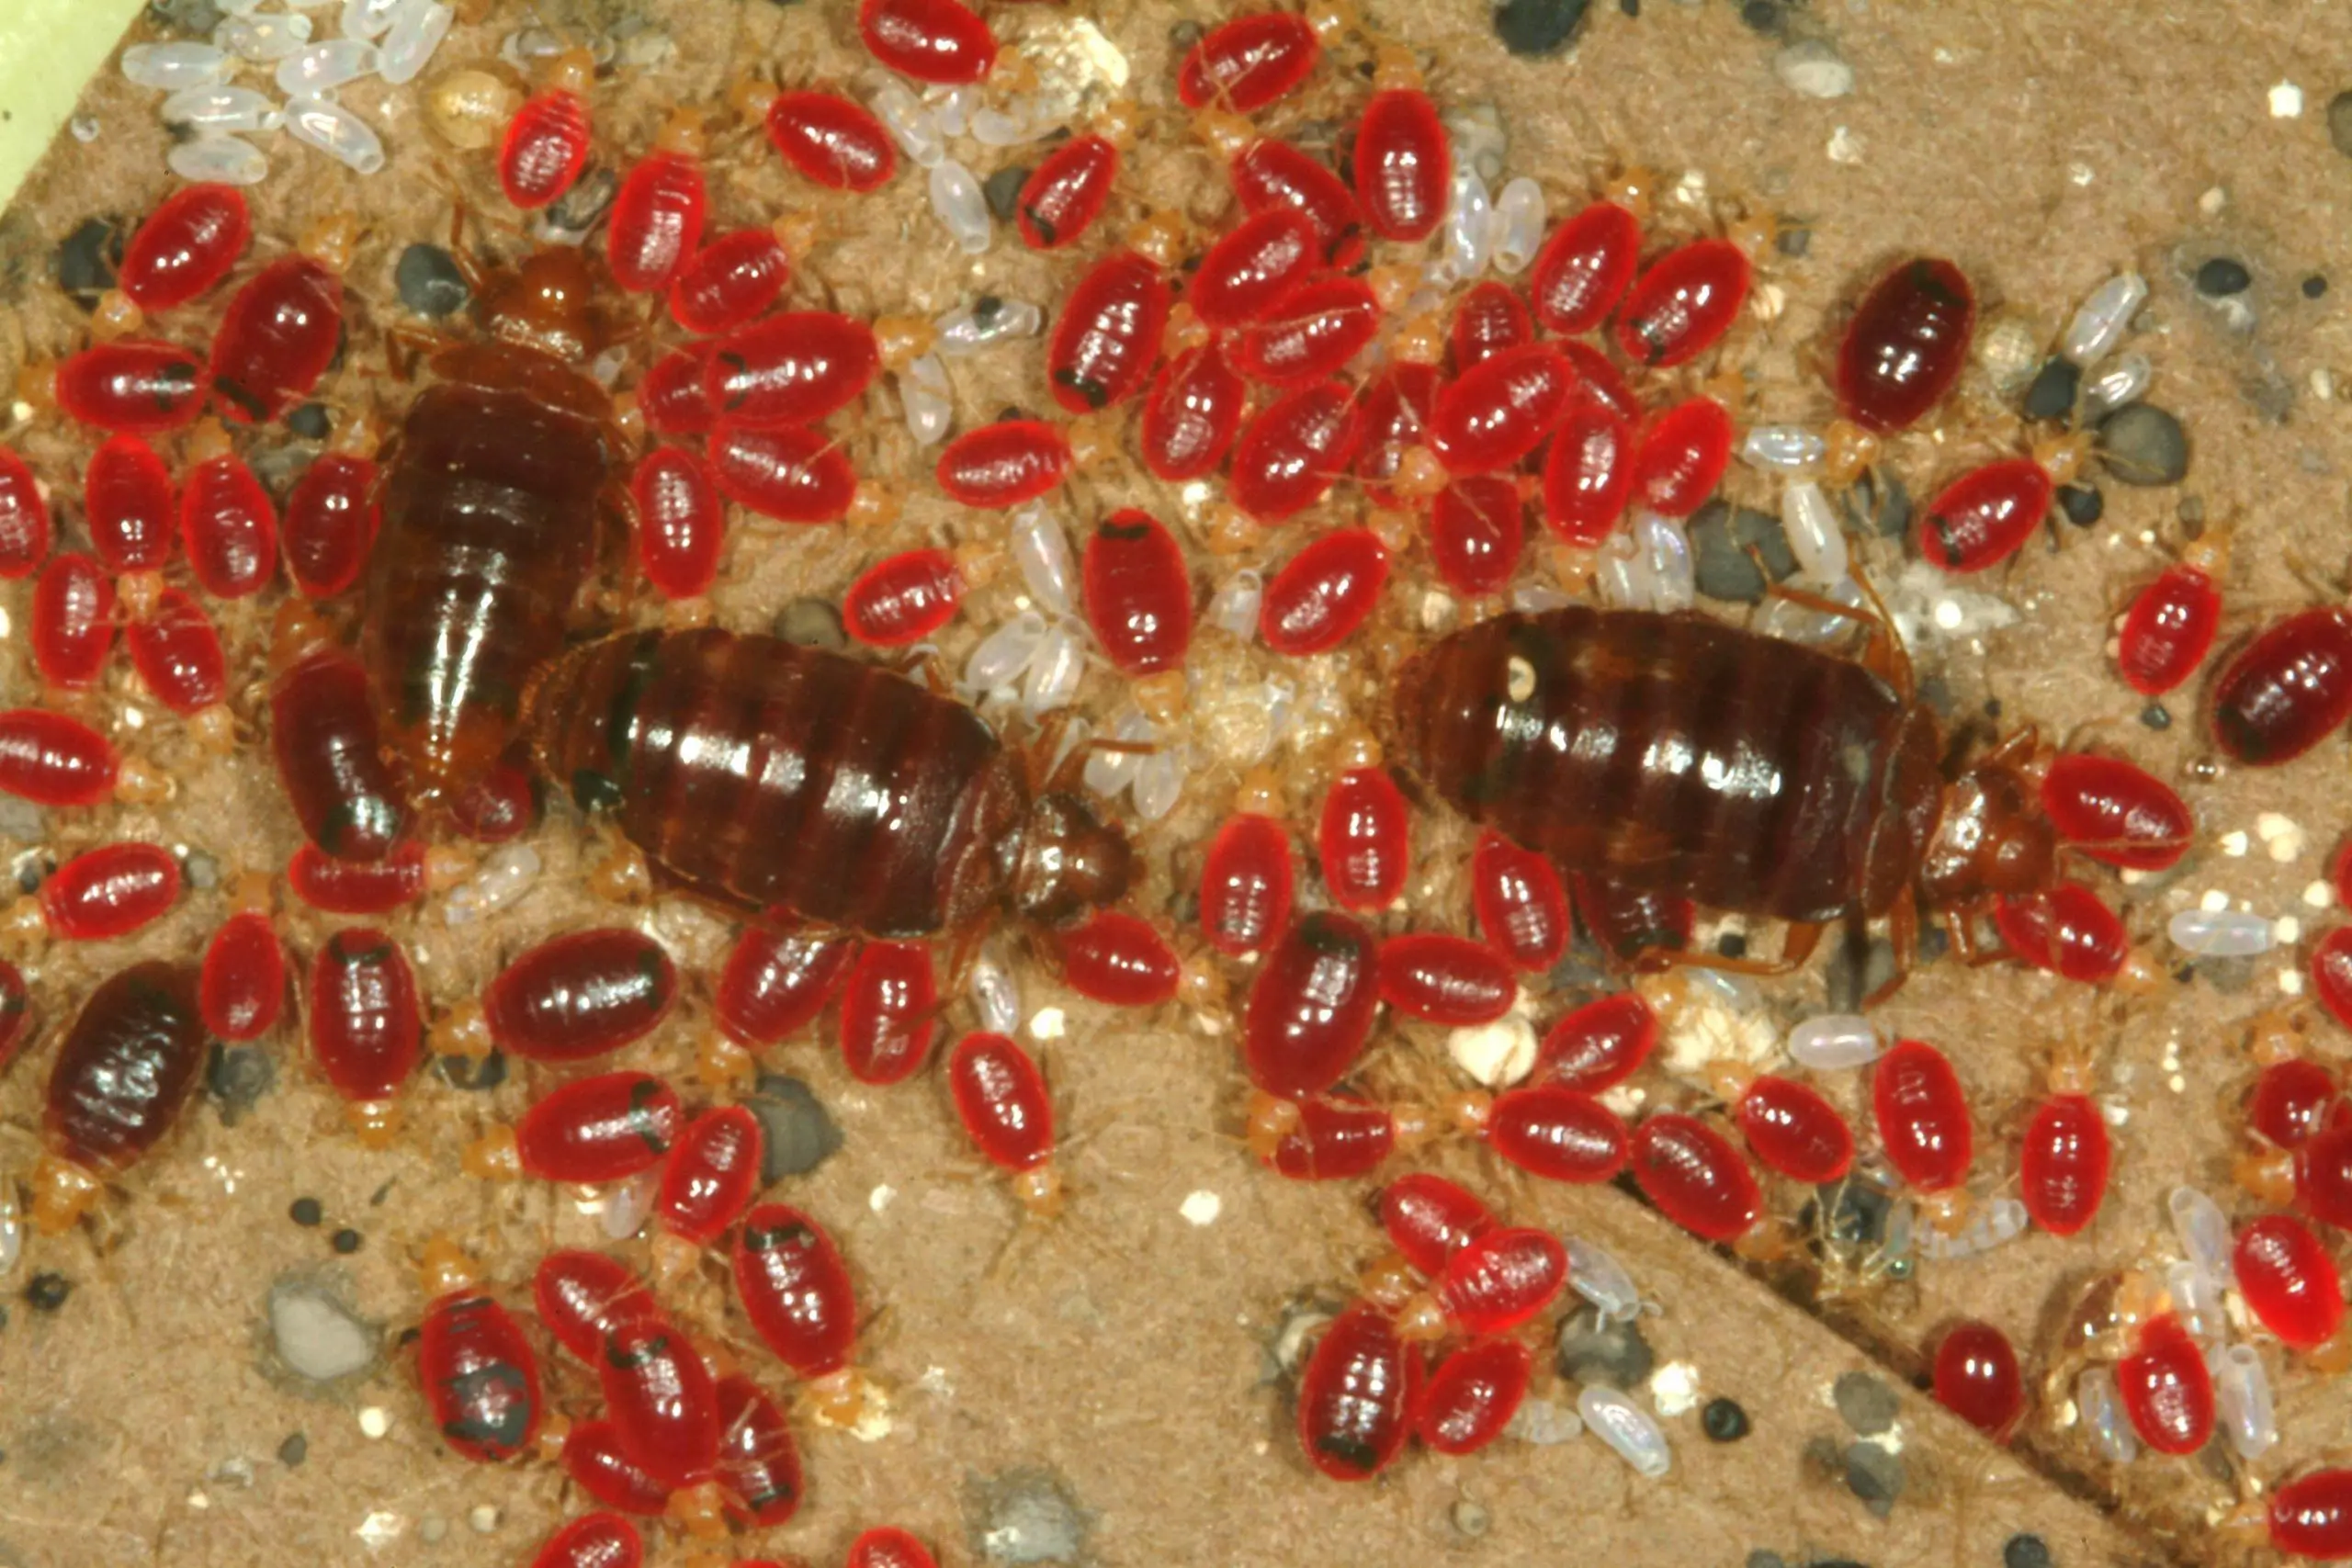 When Do Bed Bugs Bite?